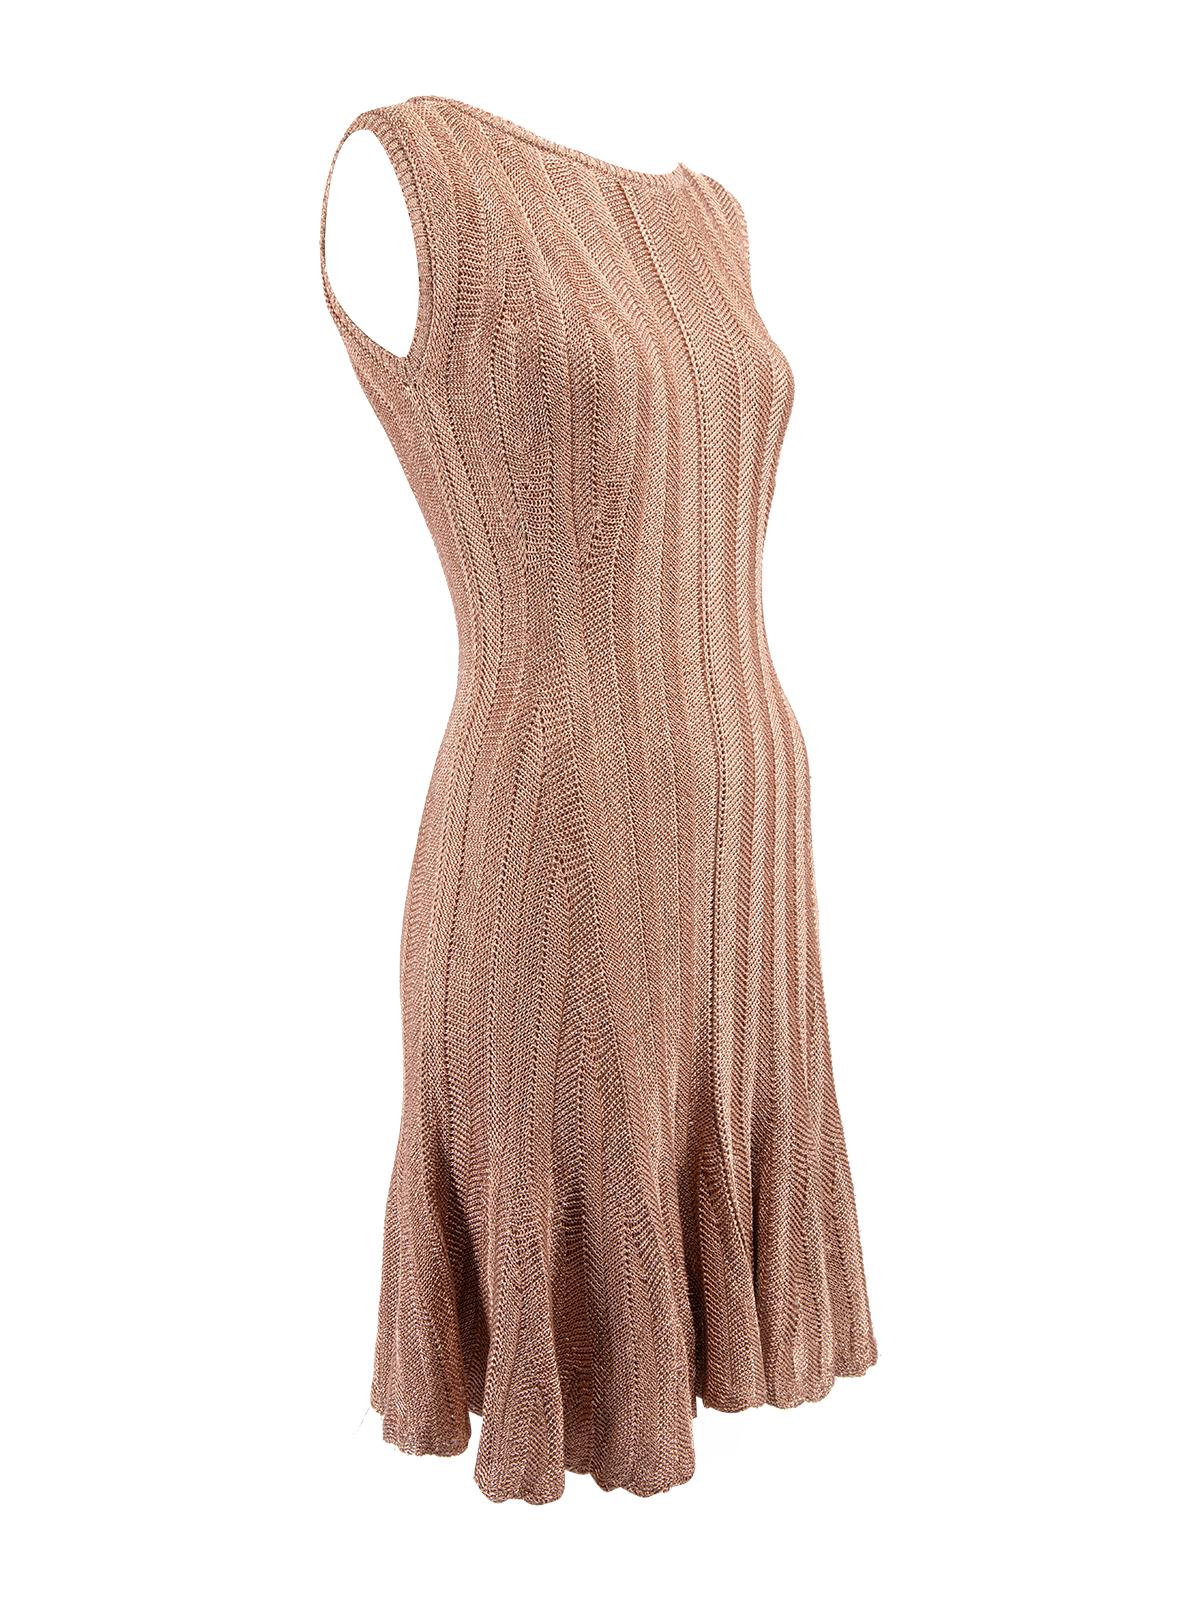 CONDITION is Very good. Minimal wear to dress is evident. Minimal wear to outer fabric and loose threads to the hemline on this used Alexander McQueen designer resale item. Details Metallic pink Viscose Sleeveless dress Body con Flared skirt Striped